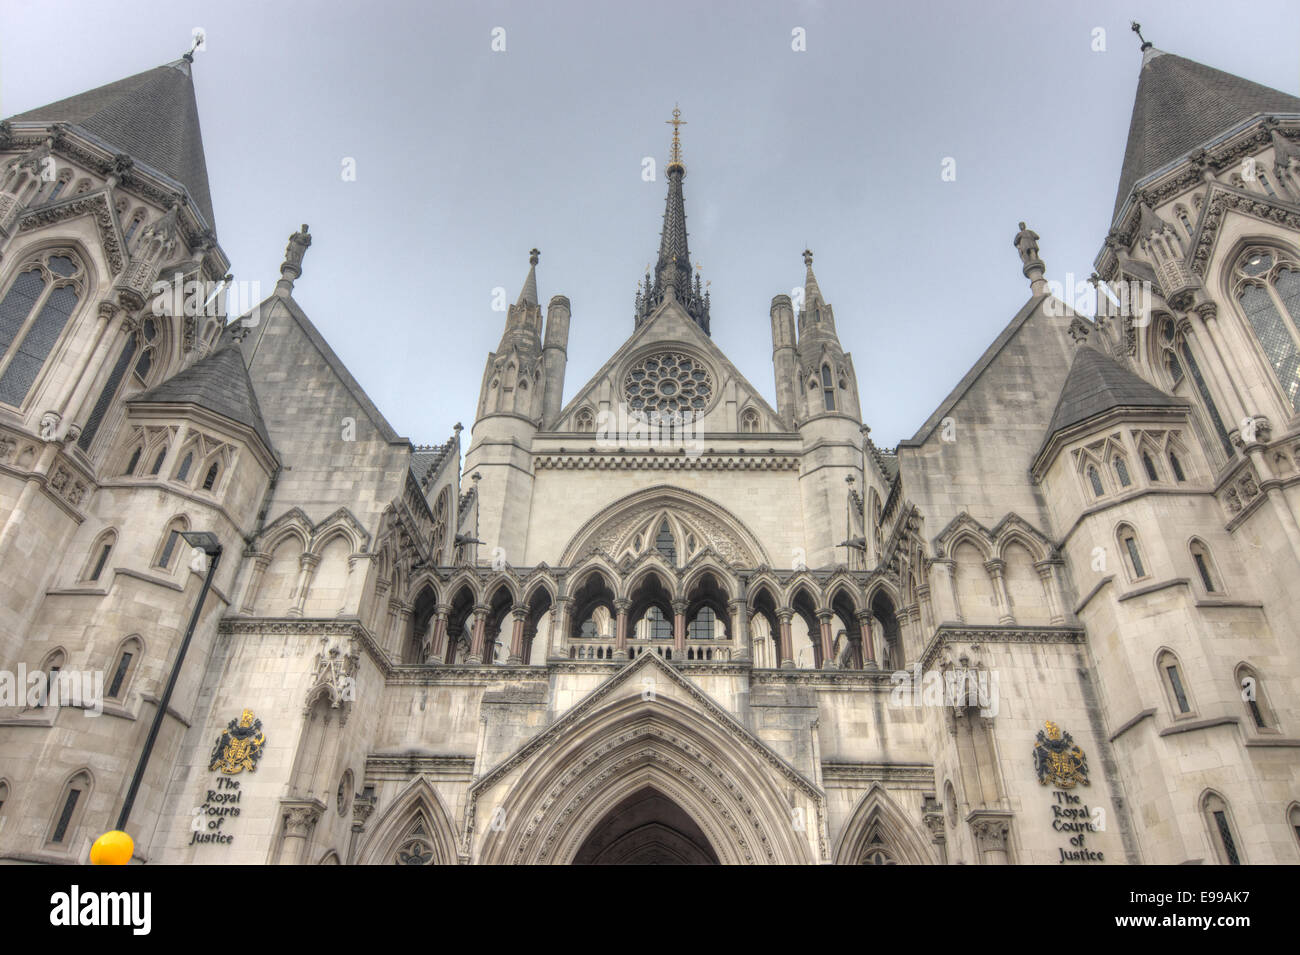 The royal courts of justice  London.  The High Court Stock Photo